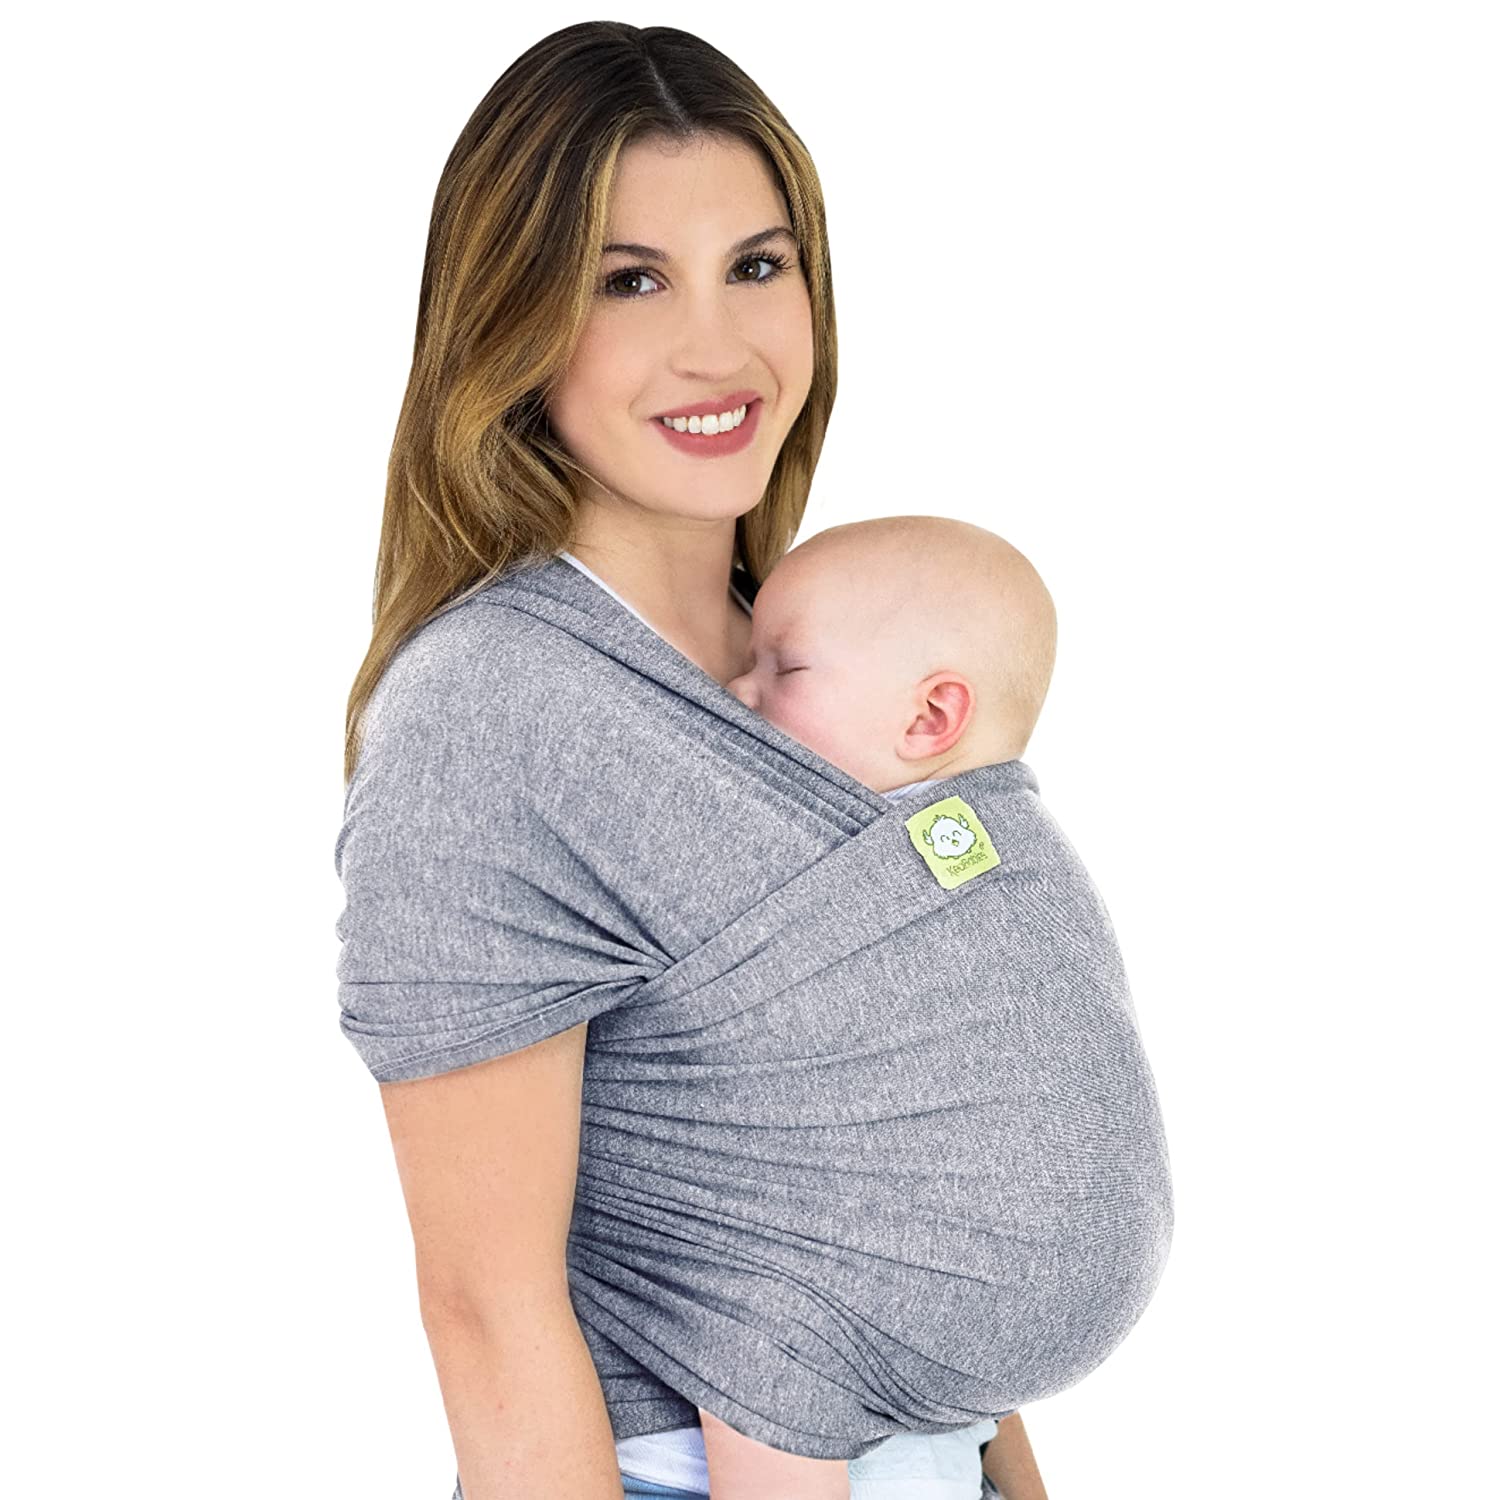 KeaBabies All-in-1 Stretchy Baby Wrap Carrier